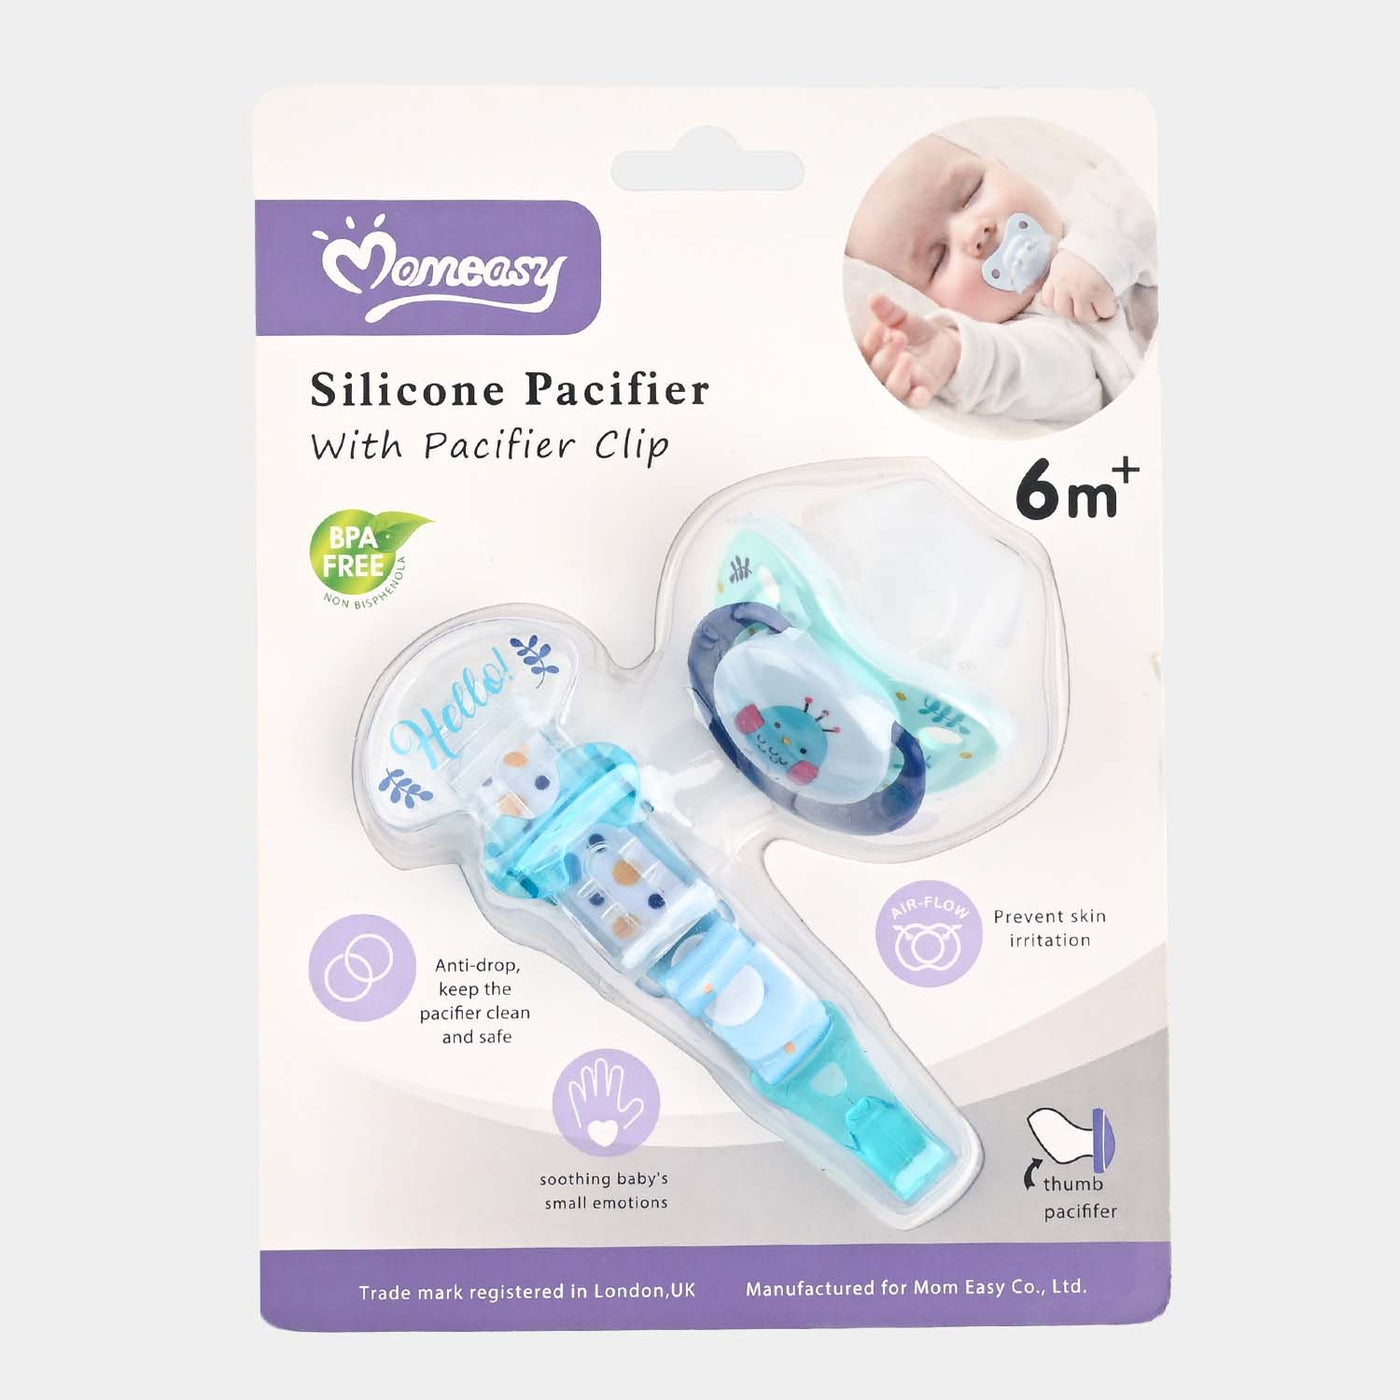 Silicone Pacifier With Pacifier Clip